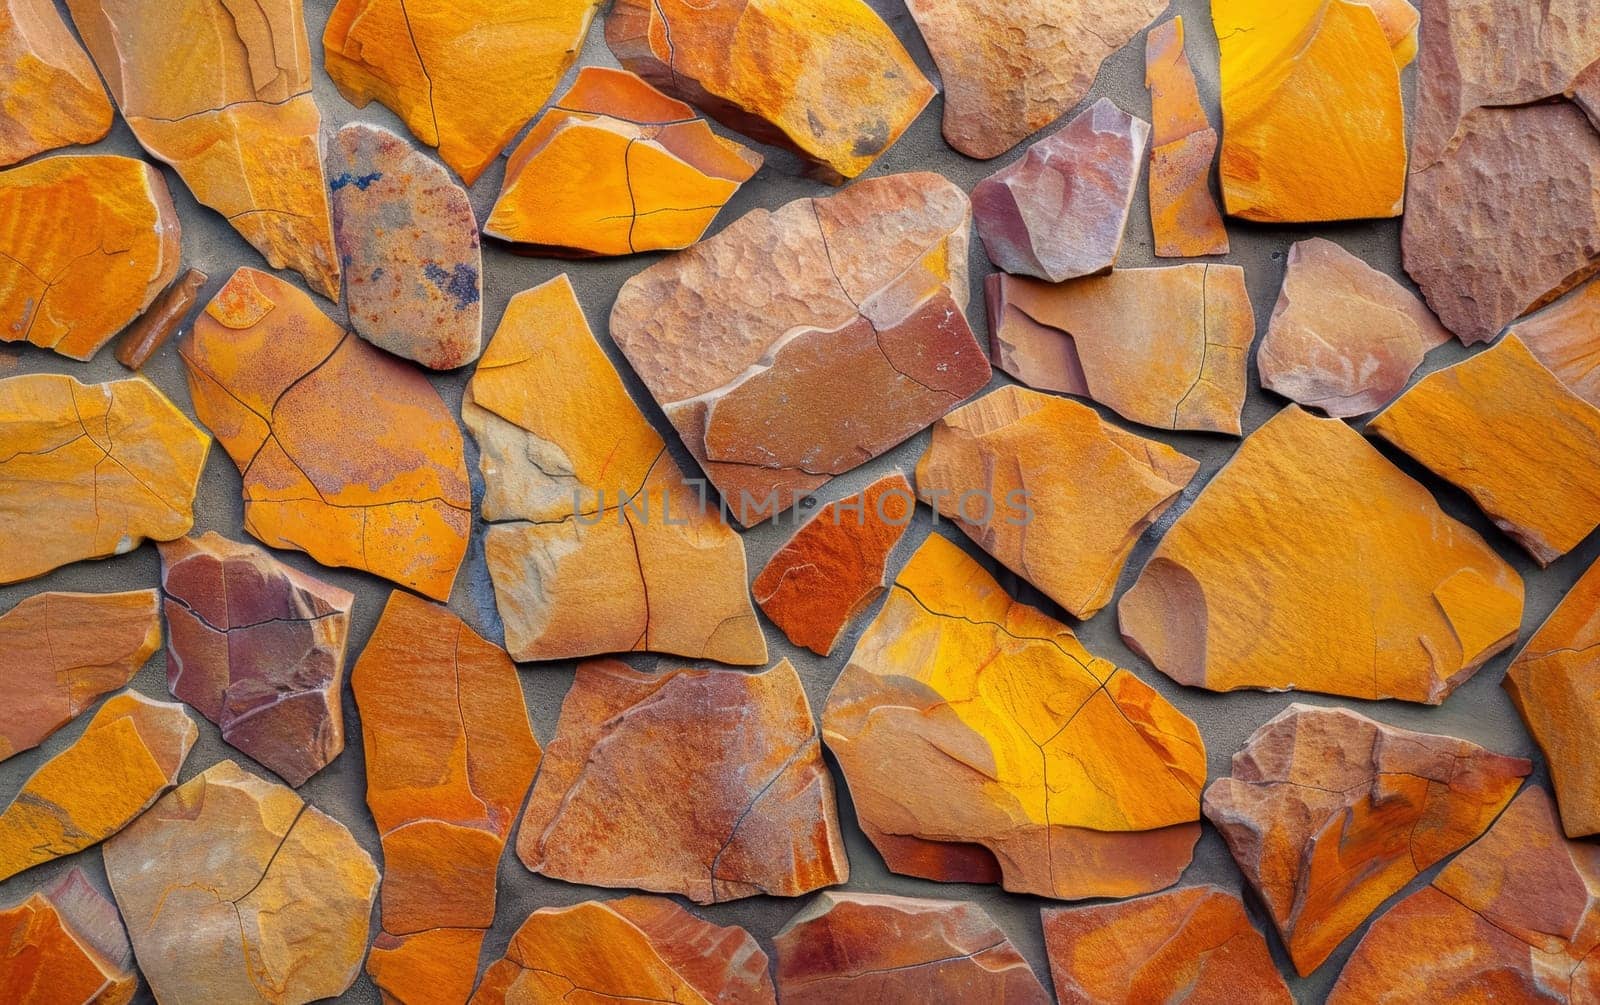 Warm-toned stone fragments tightly packed in natural design